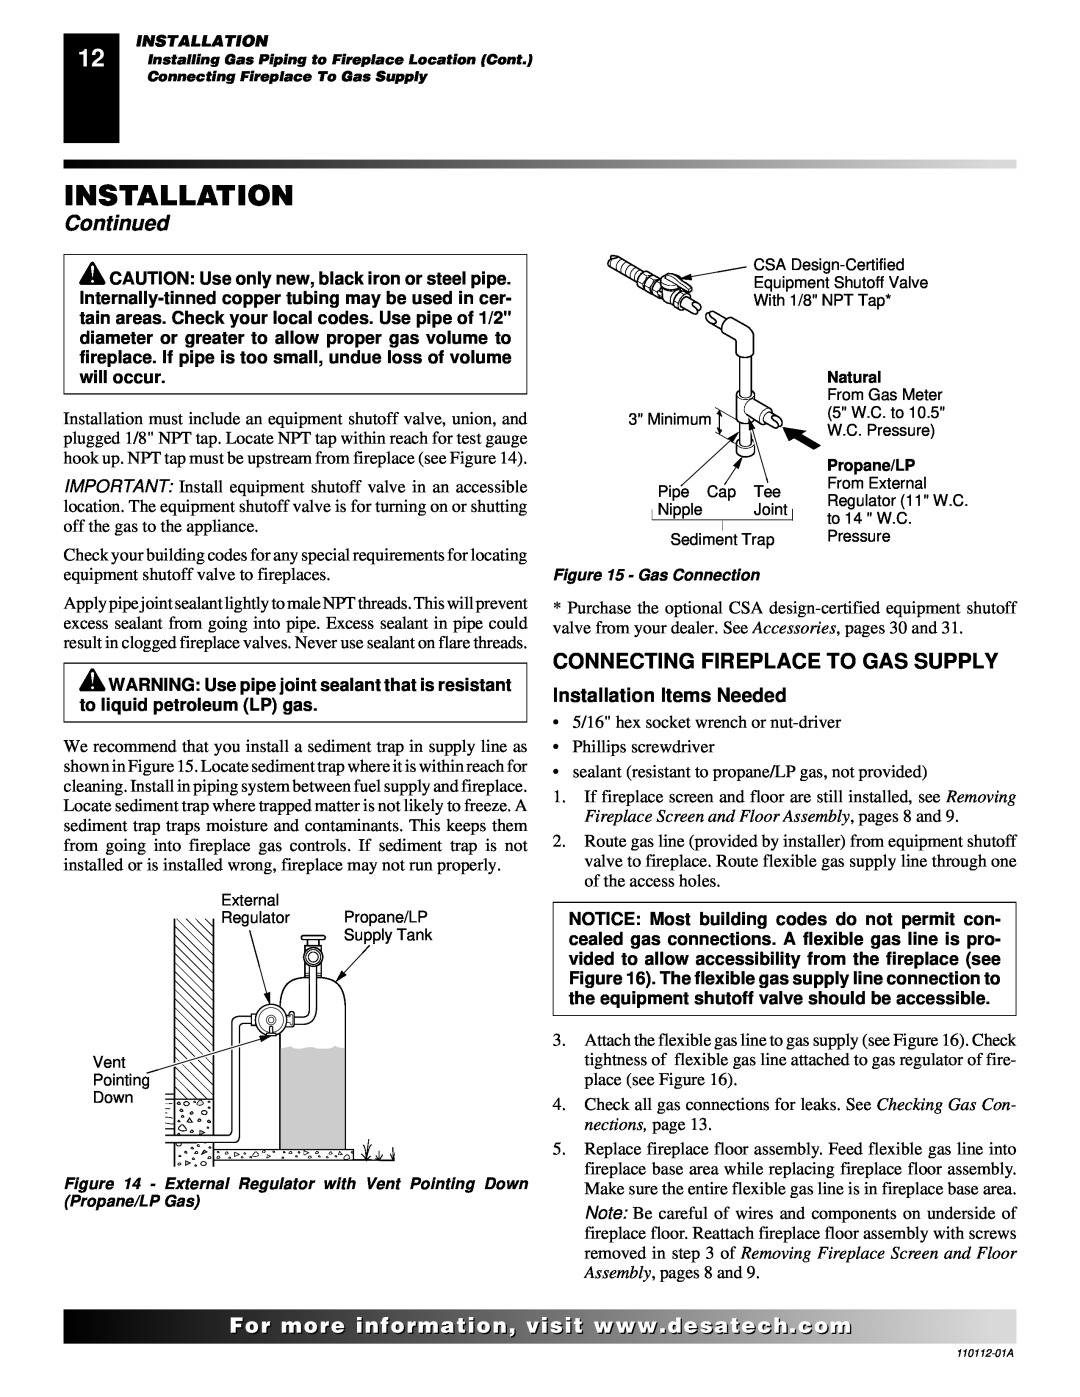 Desa VTGF33NRA installation manual Connecting Fireplace To Gas Supply, Installation, Continued, For..com, will occur 